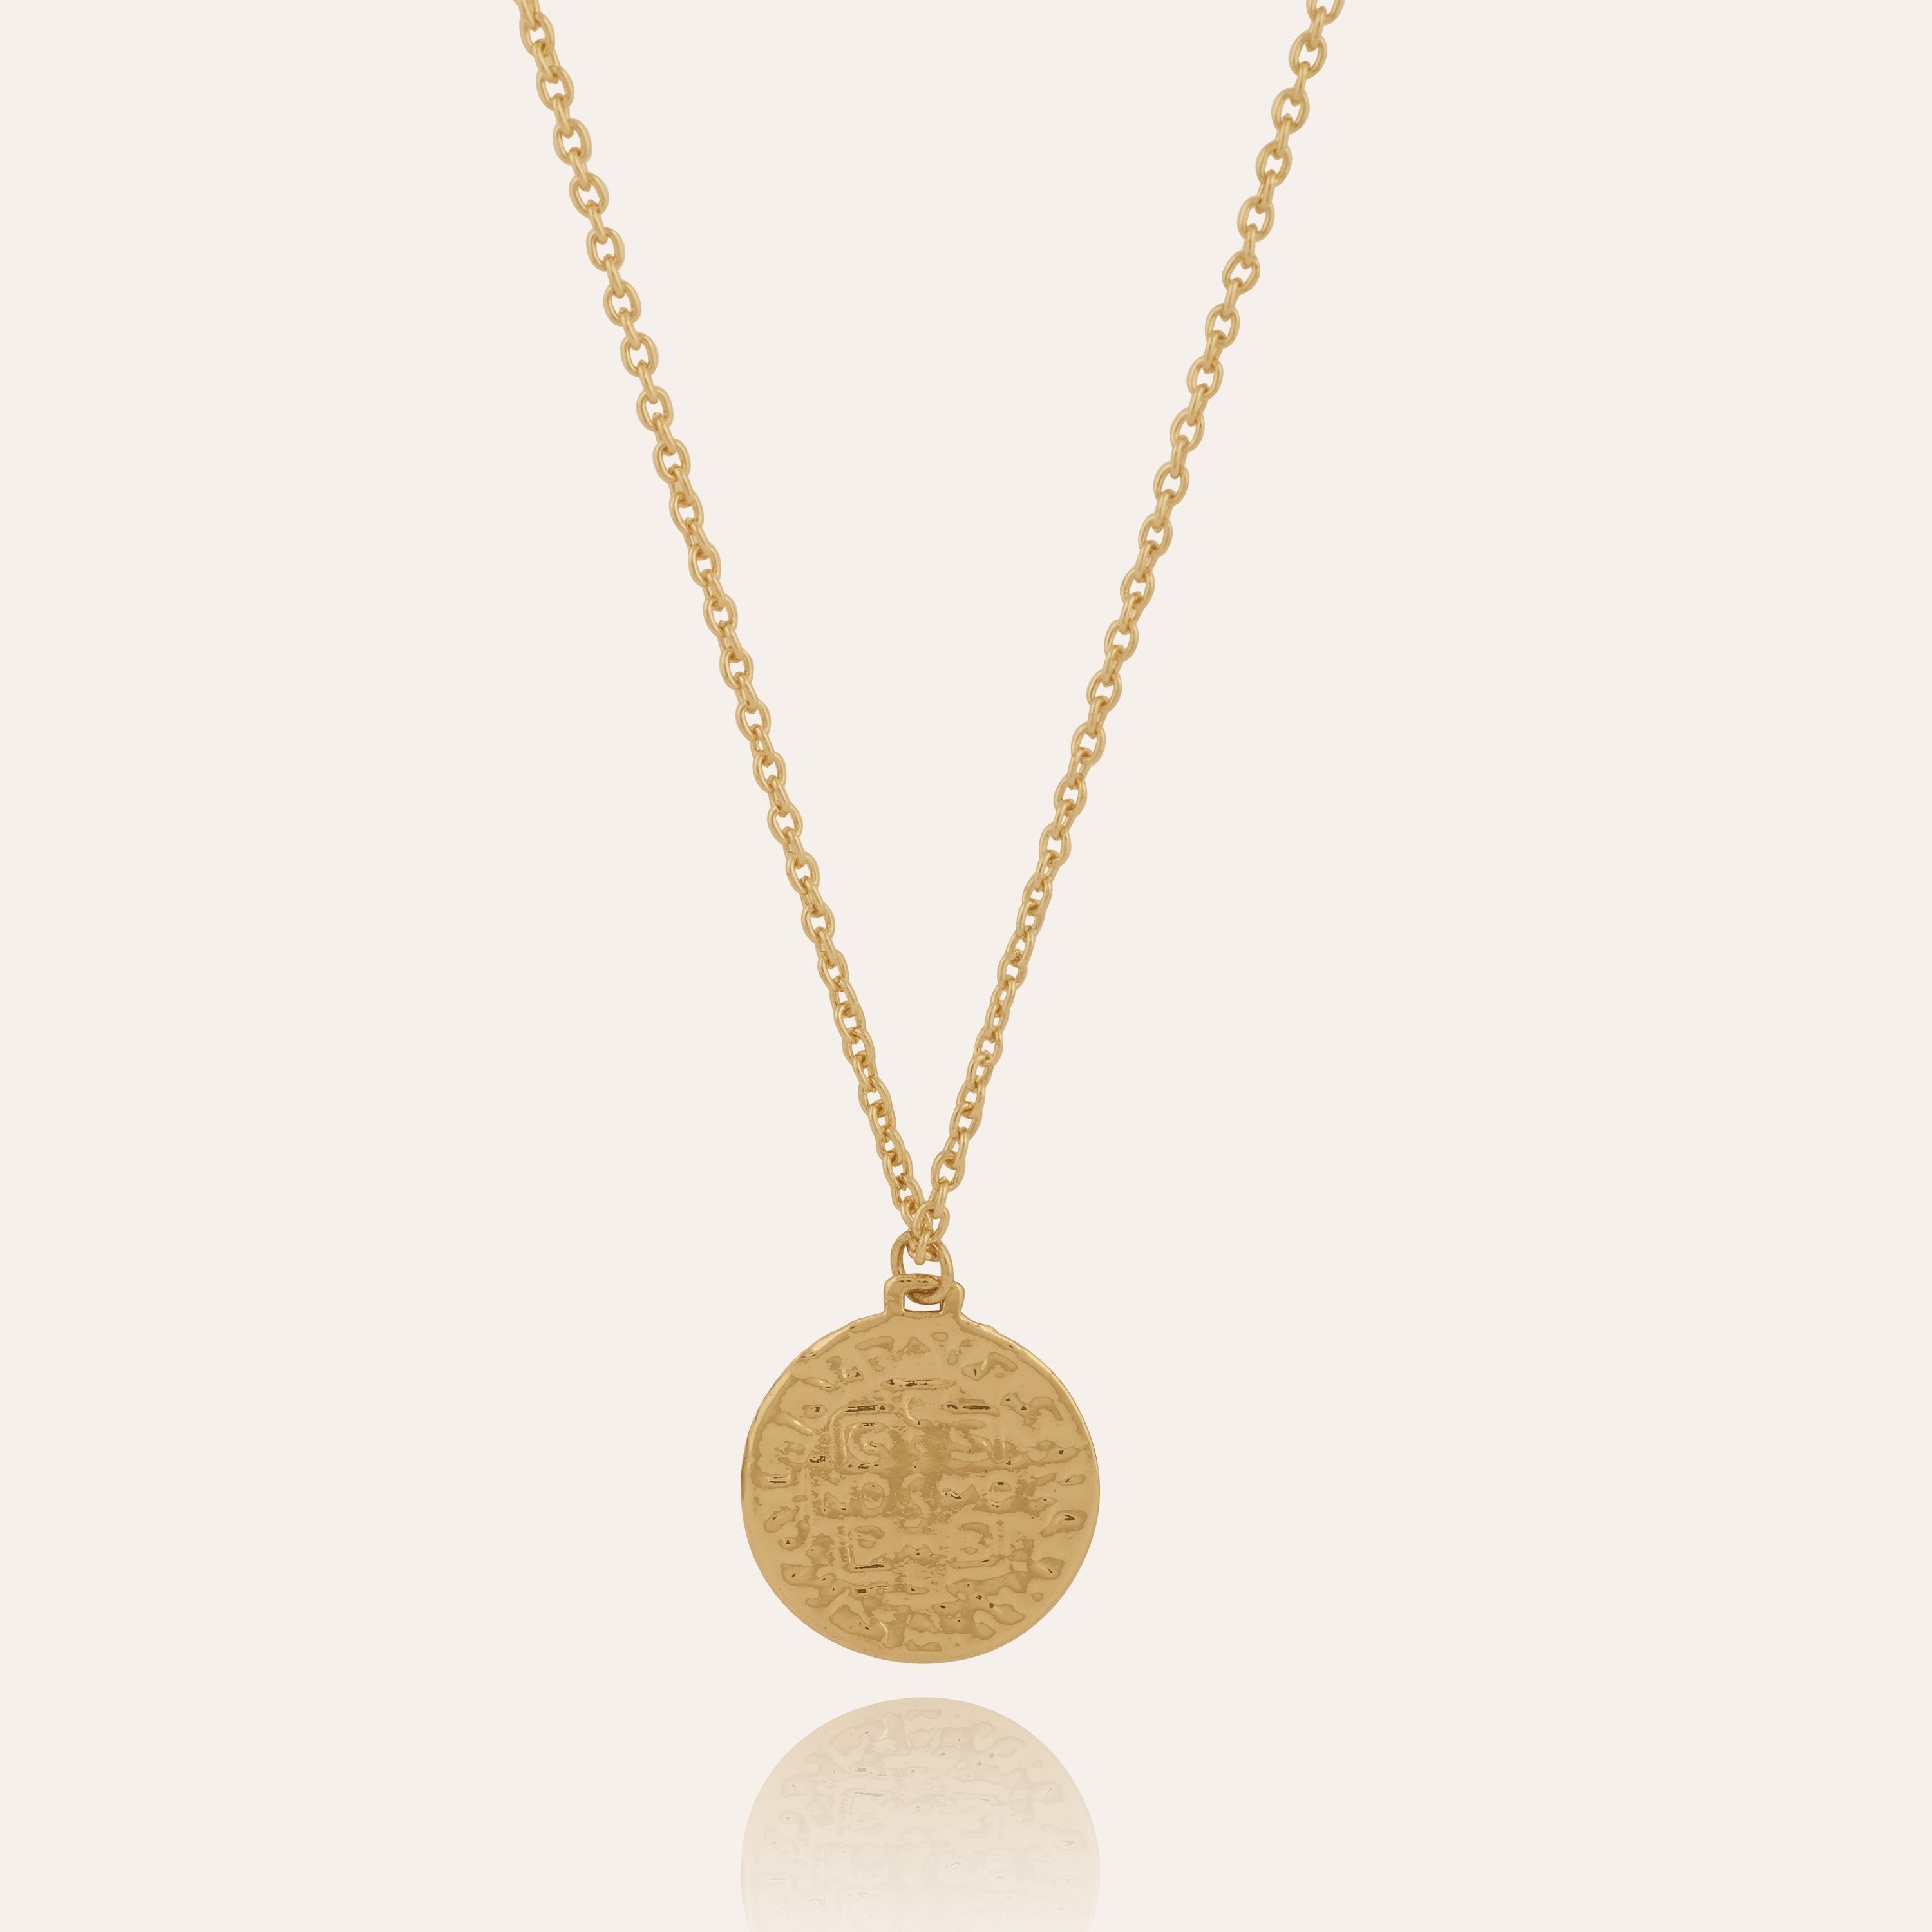 TFC Reversible Coin Gold Plated Pendant Necklace-Enhance your elegance with our collection of gold-plated necklaces for women. Choose from stunning pendant necklaces, chic choker necklaces, and trendy layered necklaces. Our sleek and dainty designs are both affordable and anti-tarnish, ensuring lasting beauty. Enjoy the cheapest fashion jewellery, lightweight and stylish- only at The Fun Company